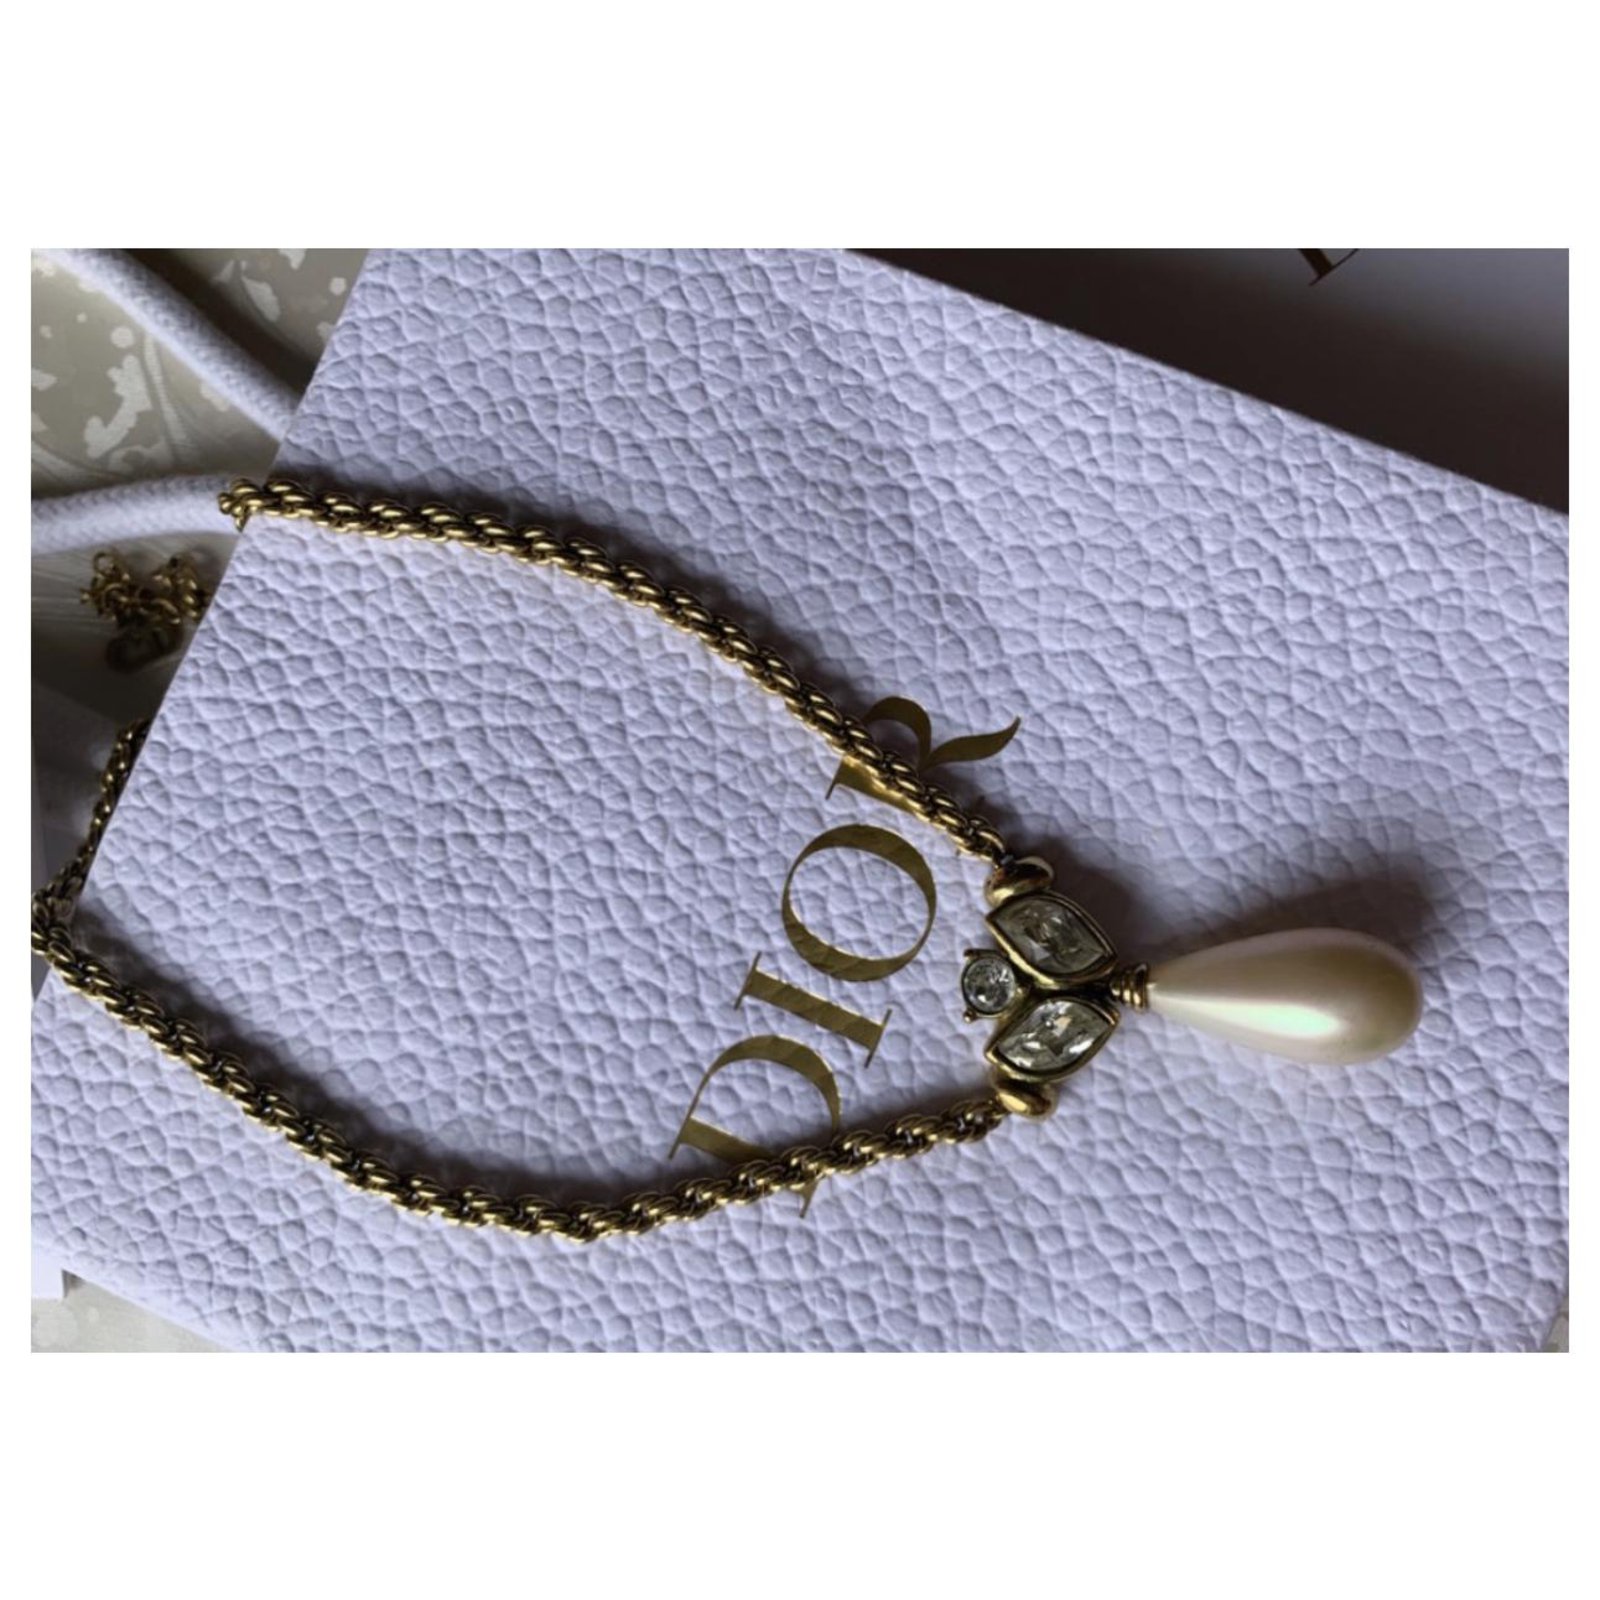 Dior Jewelry | Christian Dior Necklaces, Earrings and More – Reluxe Vintage